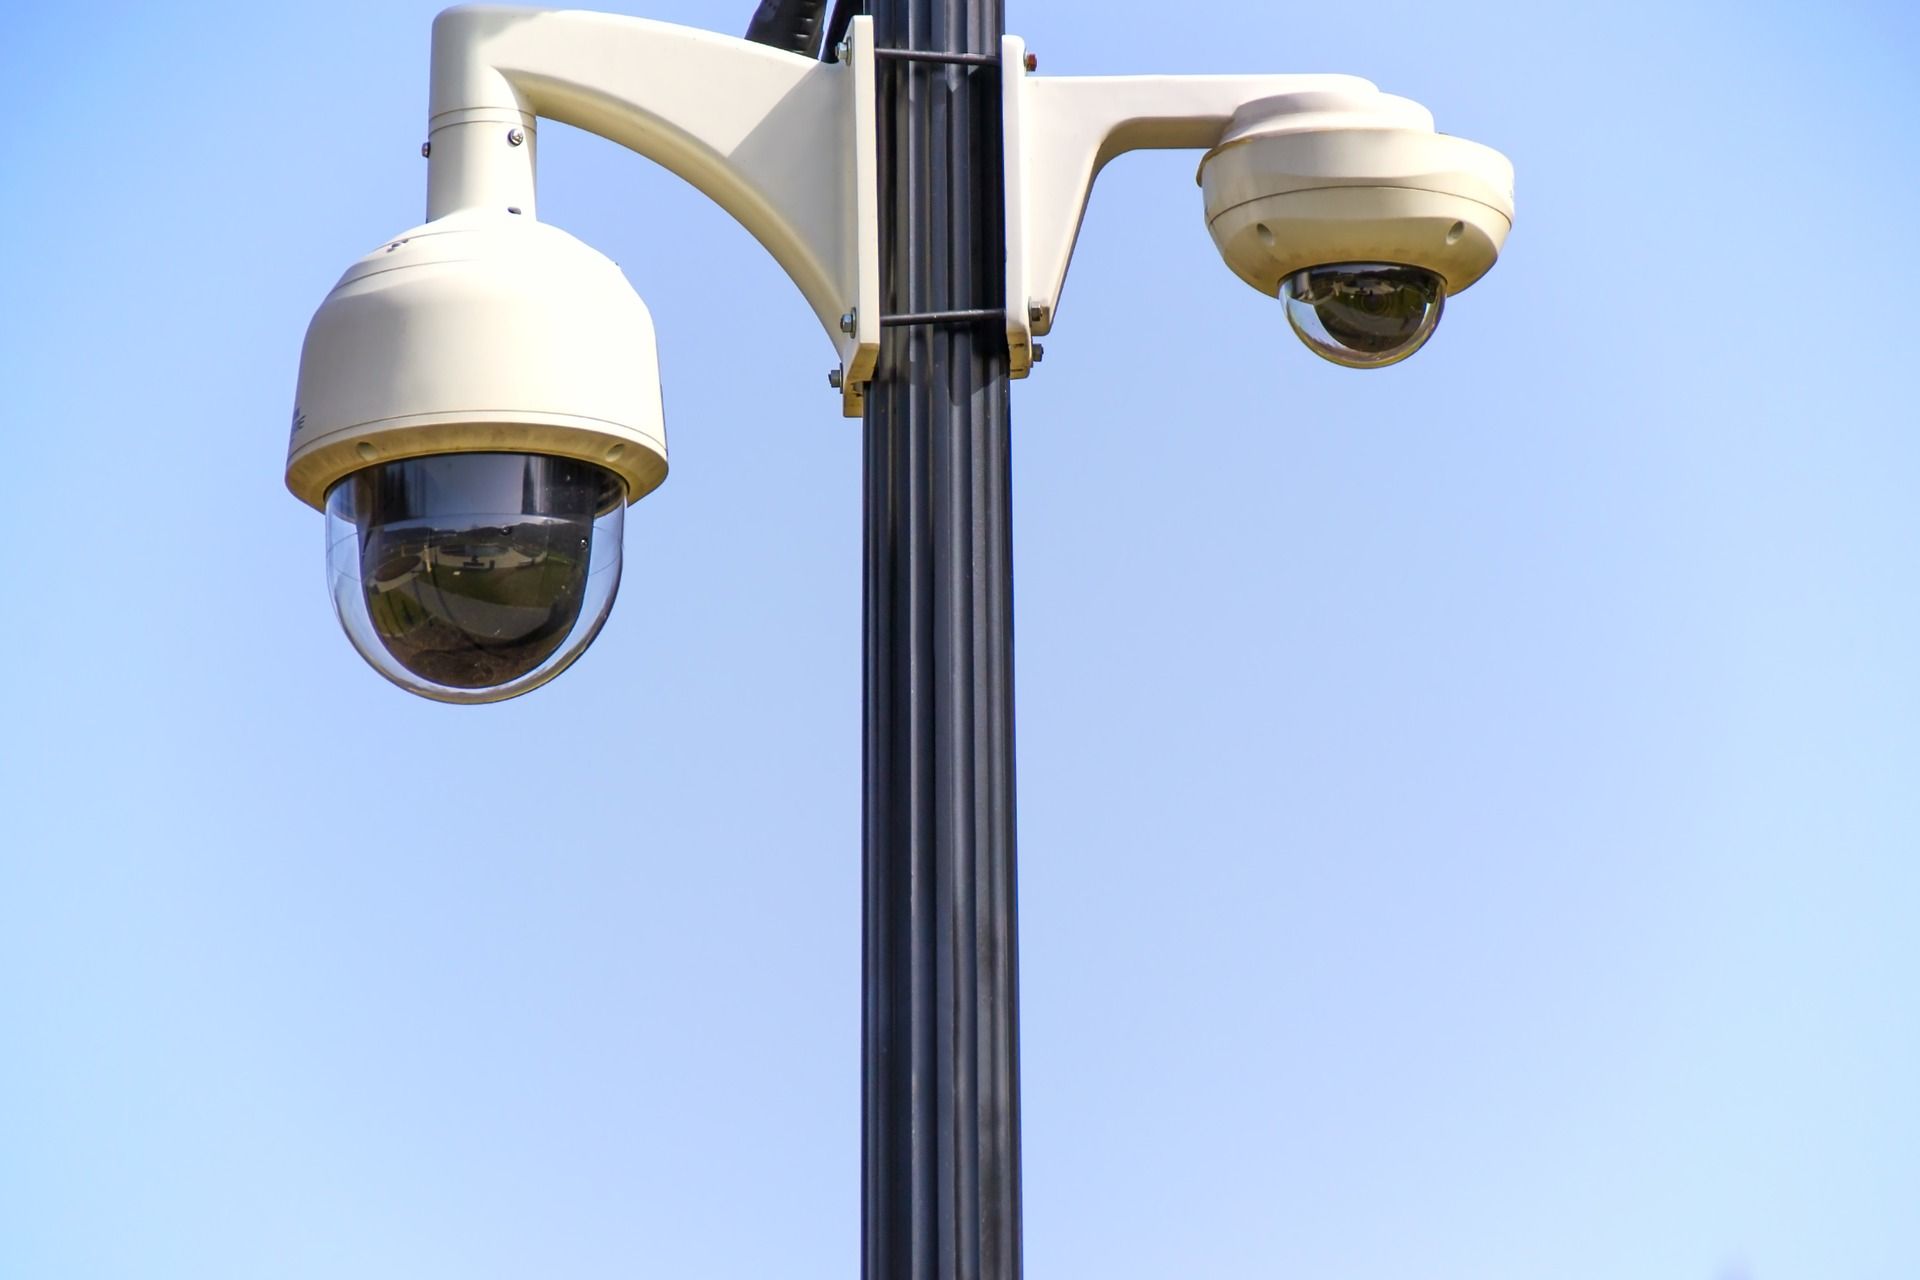 Is Security Camera Footage Admissible in Court?